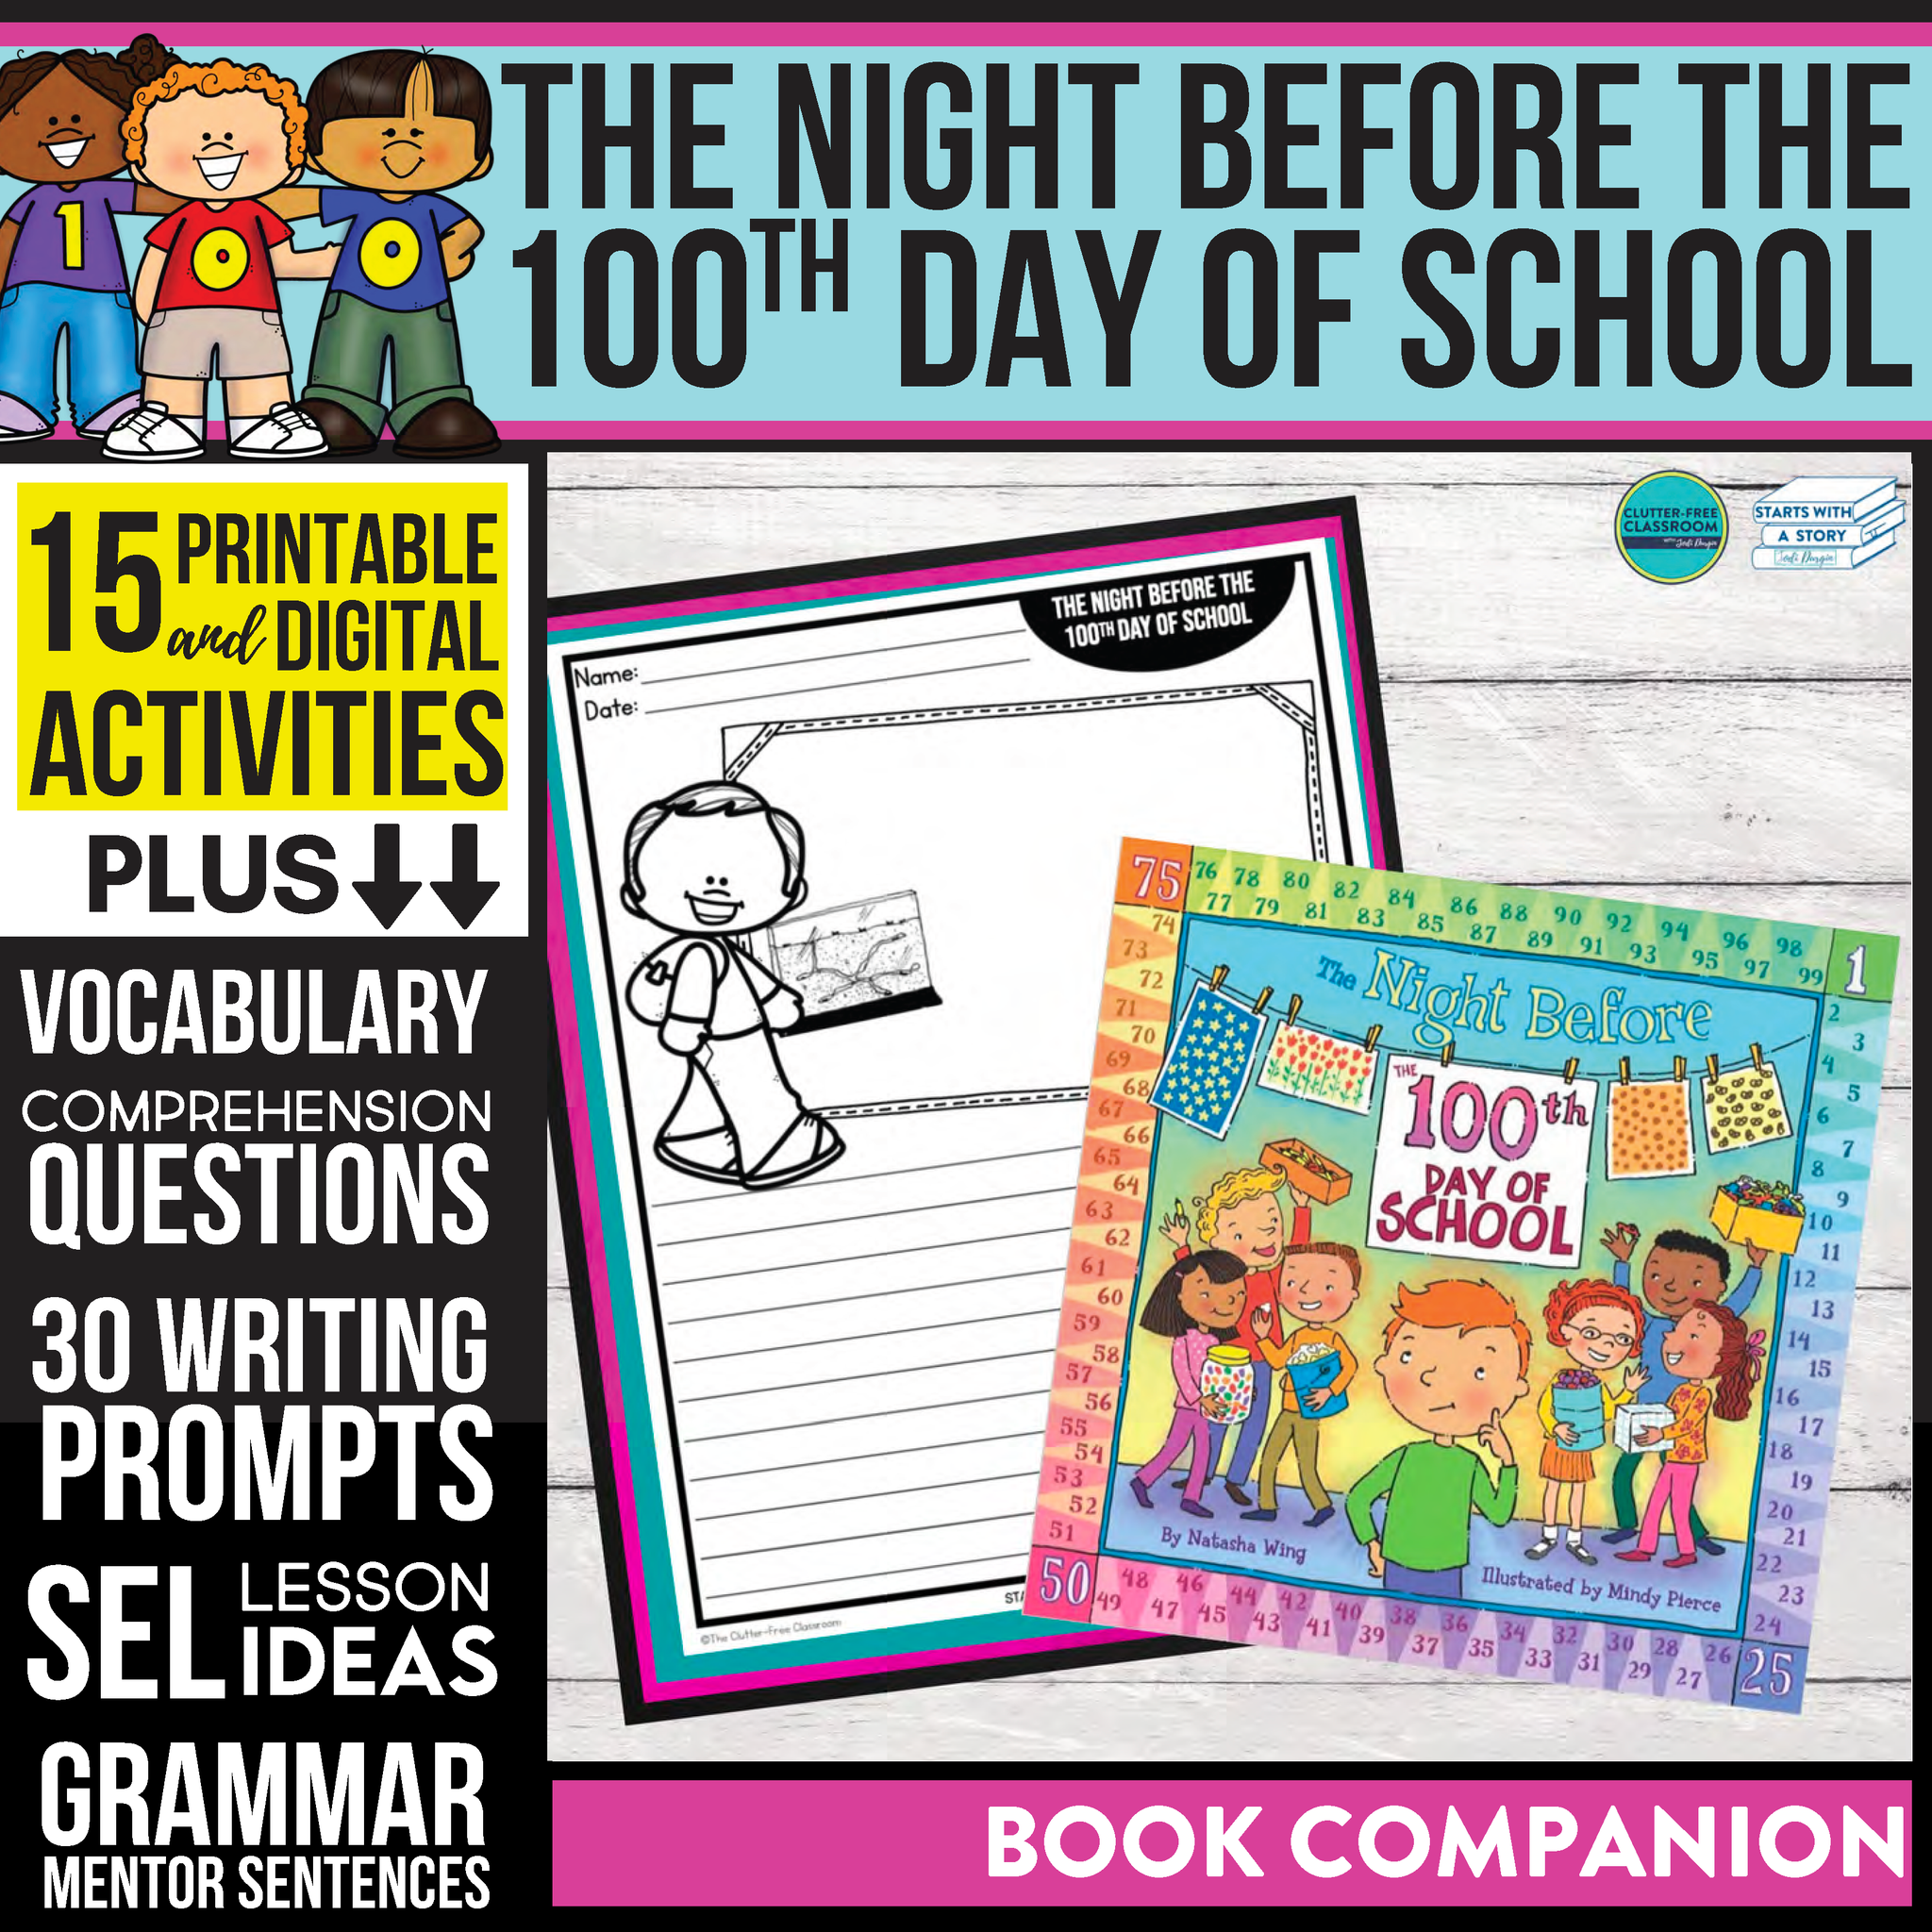 THE NIGHT BEFORE THE 100TH DAY OF SCHOOL activities and lesson plan ideas